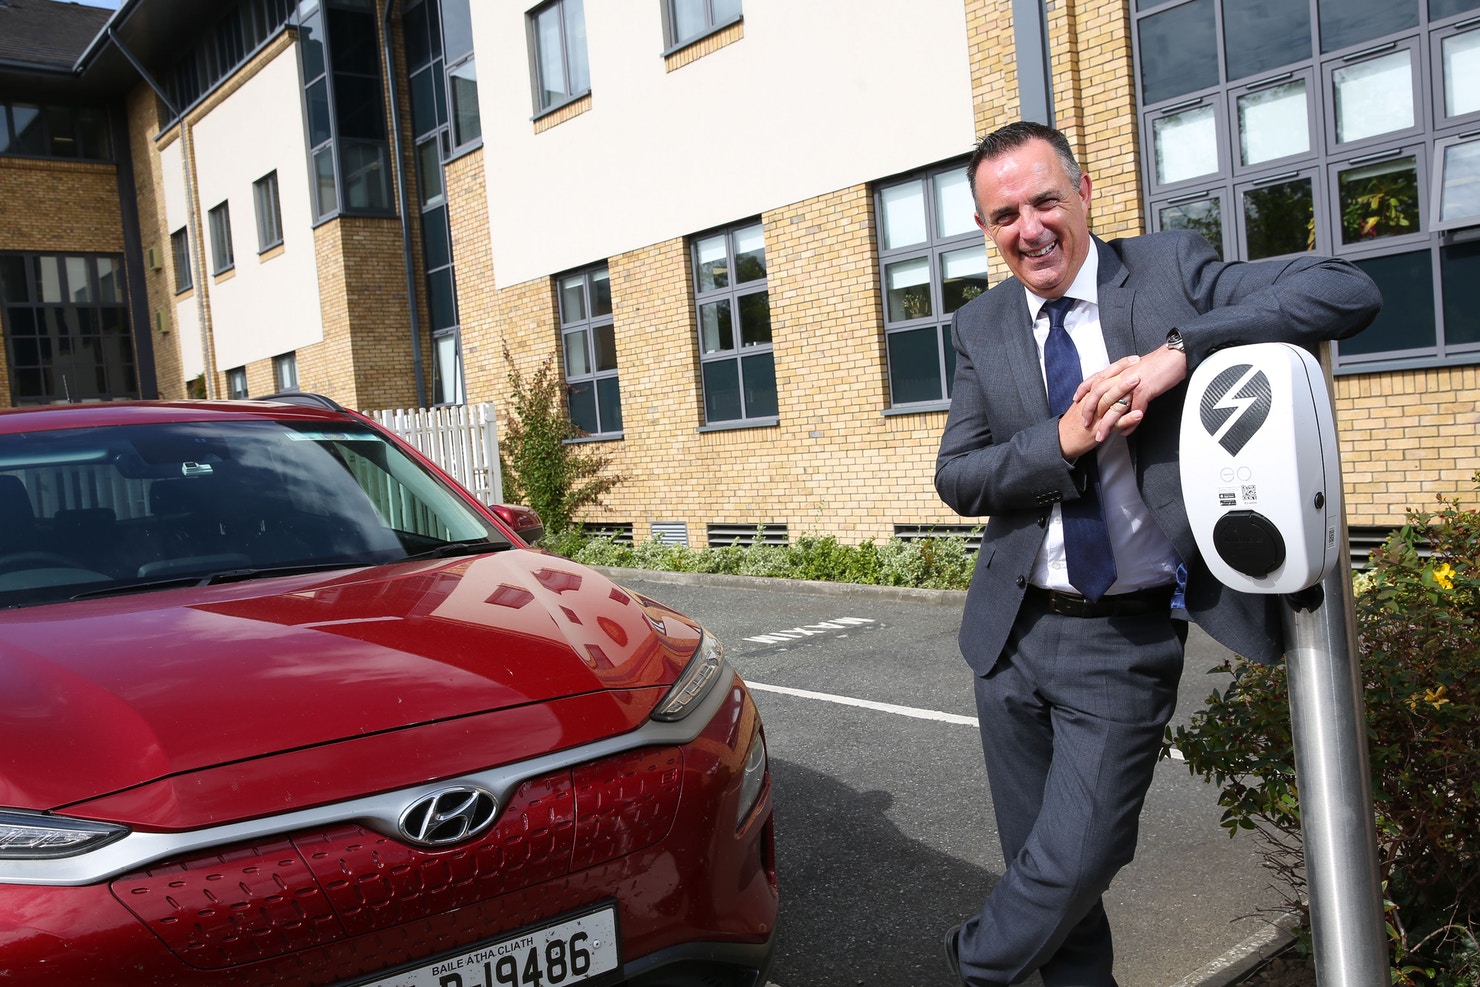 Is your commercial property or business ready for the electric vehicle revolution?